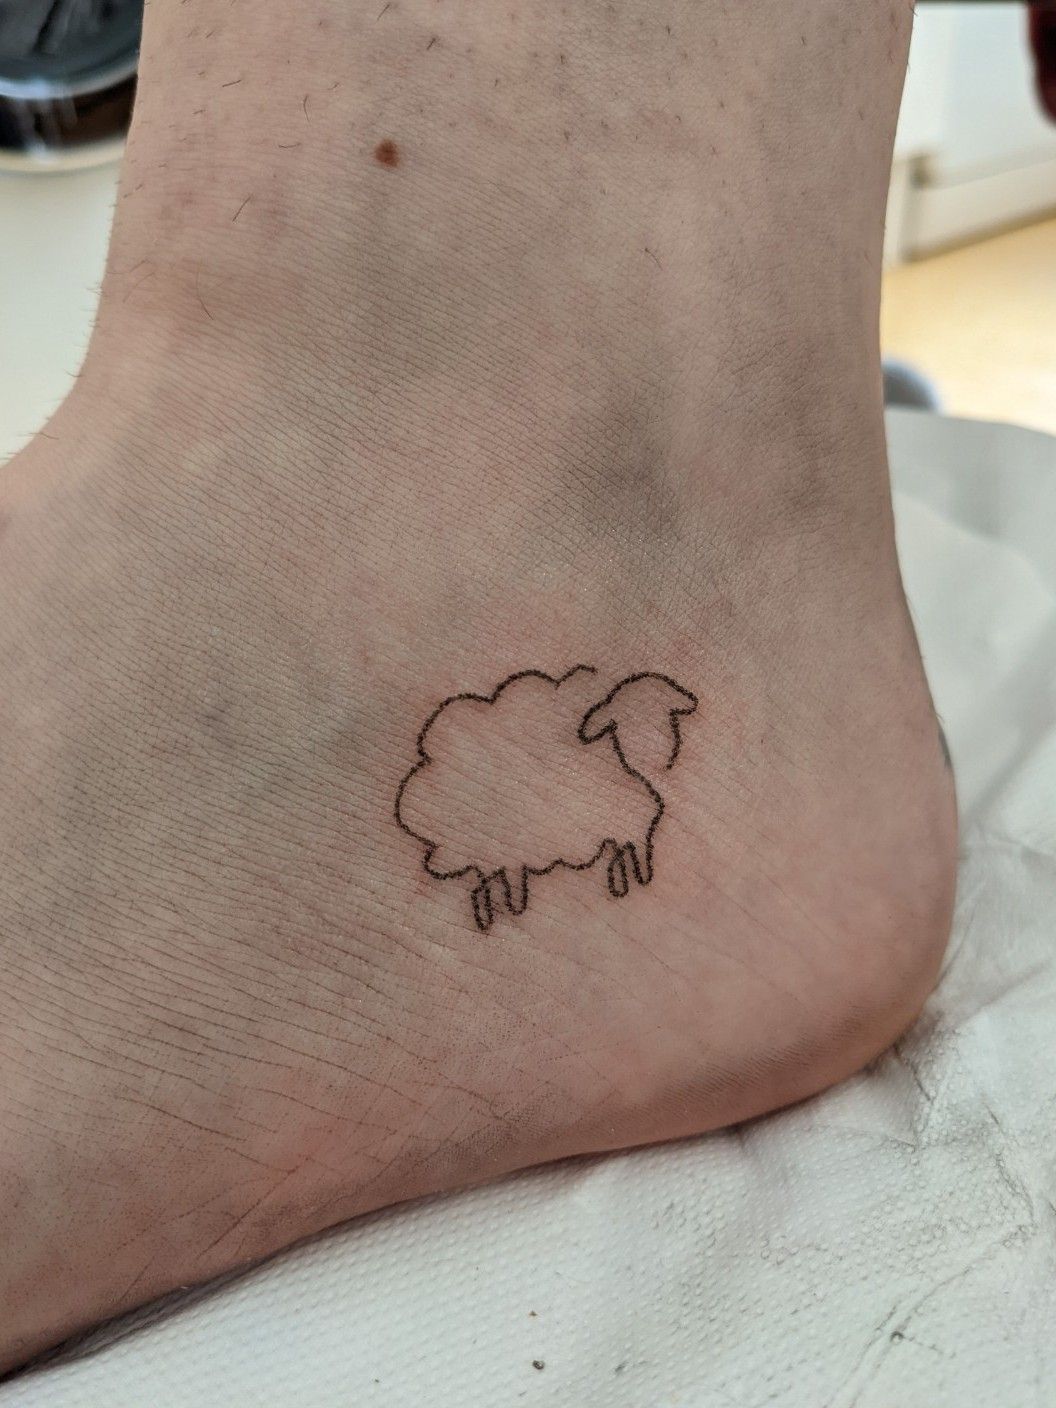 12 Adorable Minimalist Tattoos That Will Make You Want To Get Inked  Part 1